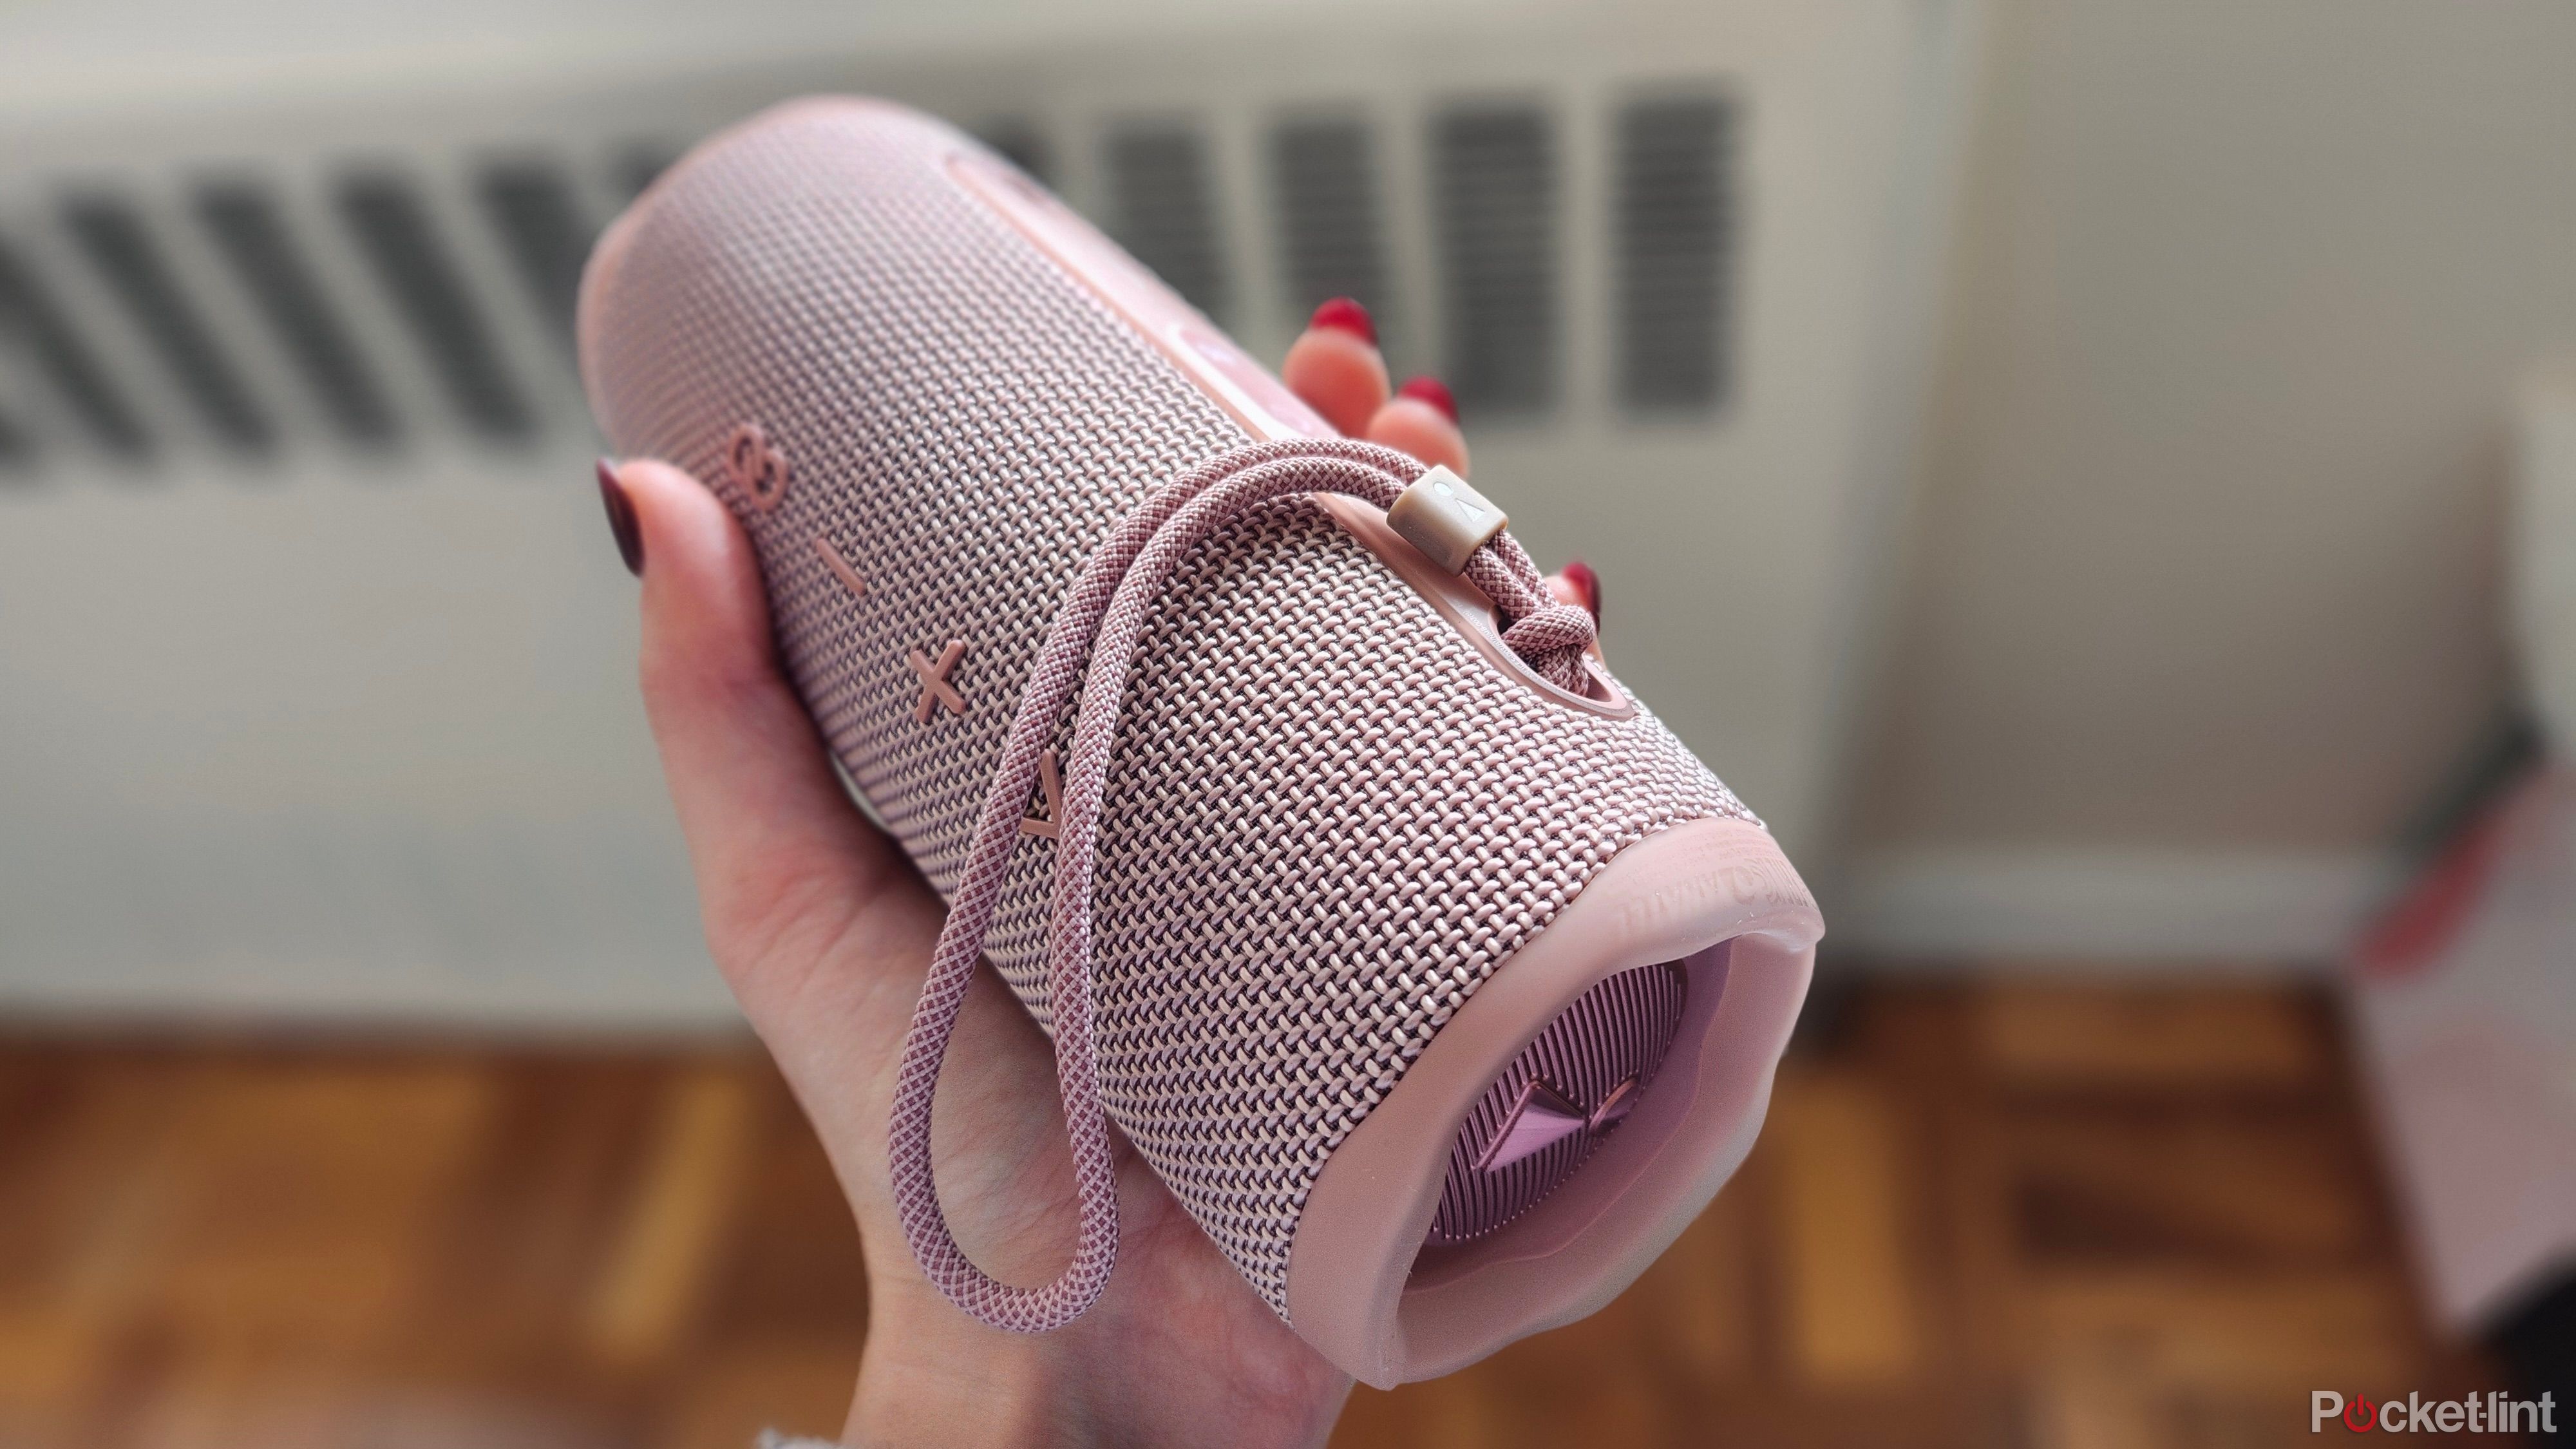 A year later and the JBL Flip 6 still packs the perfect portable punch